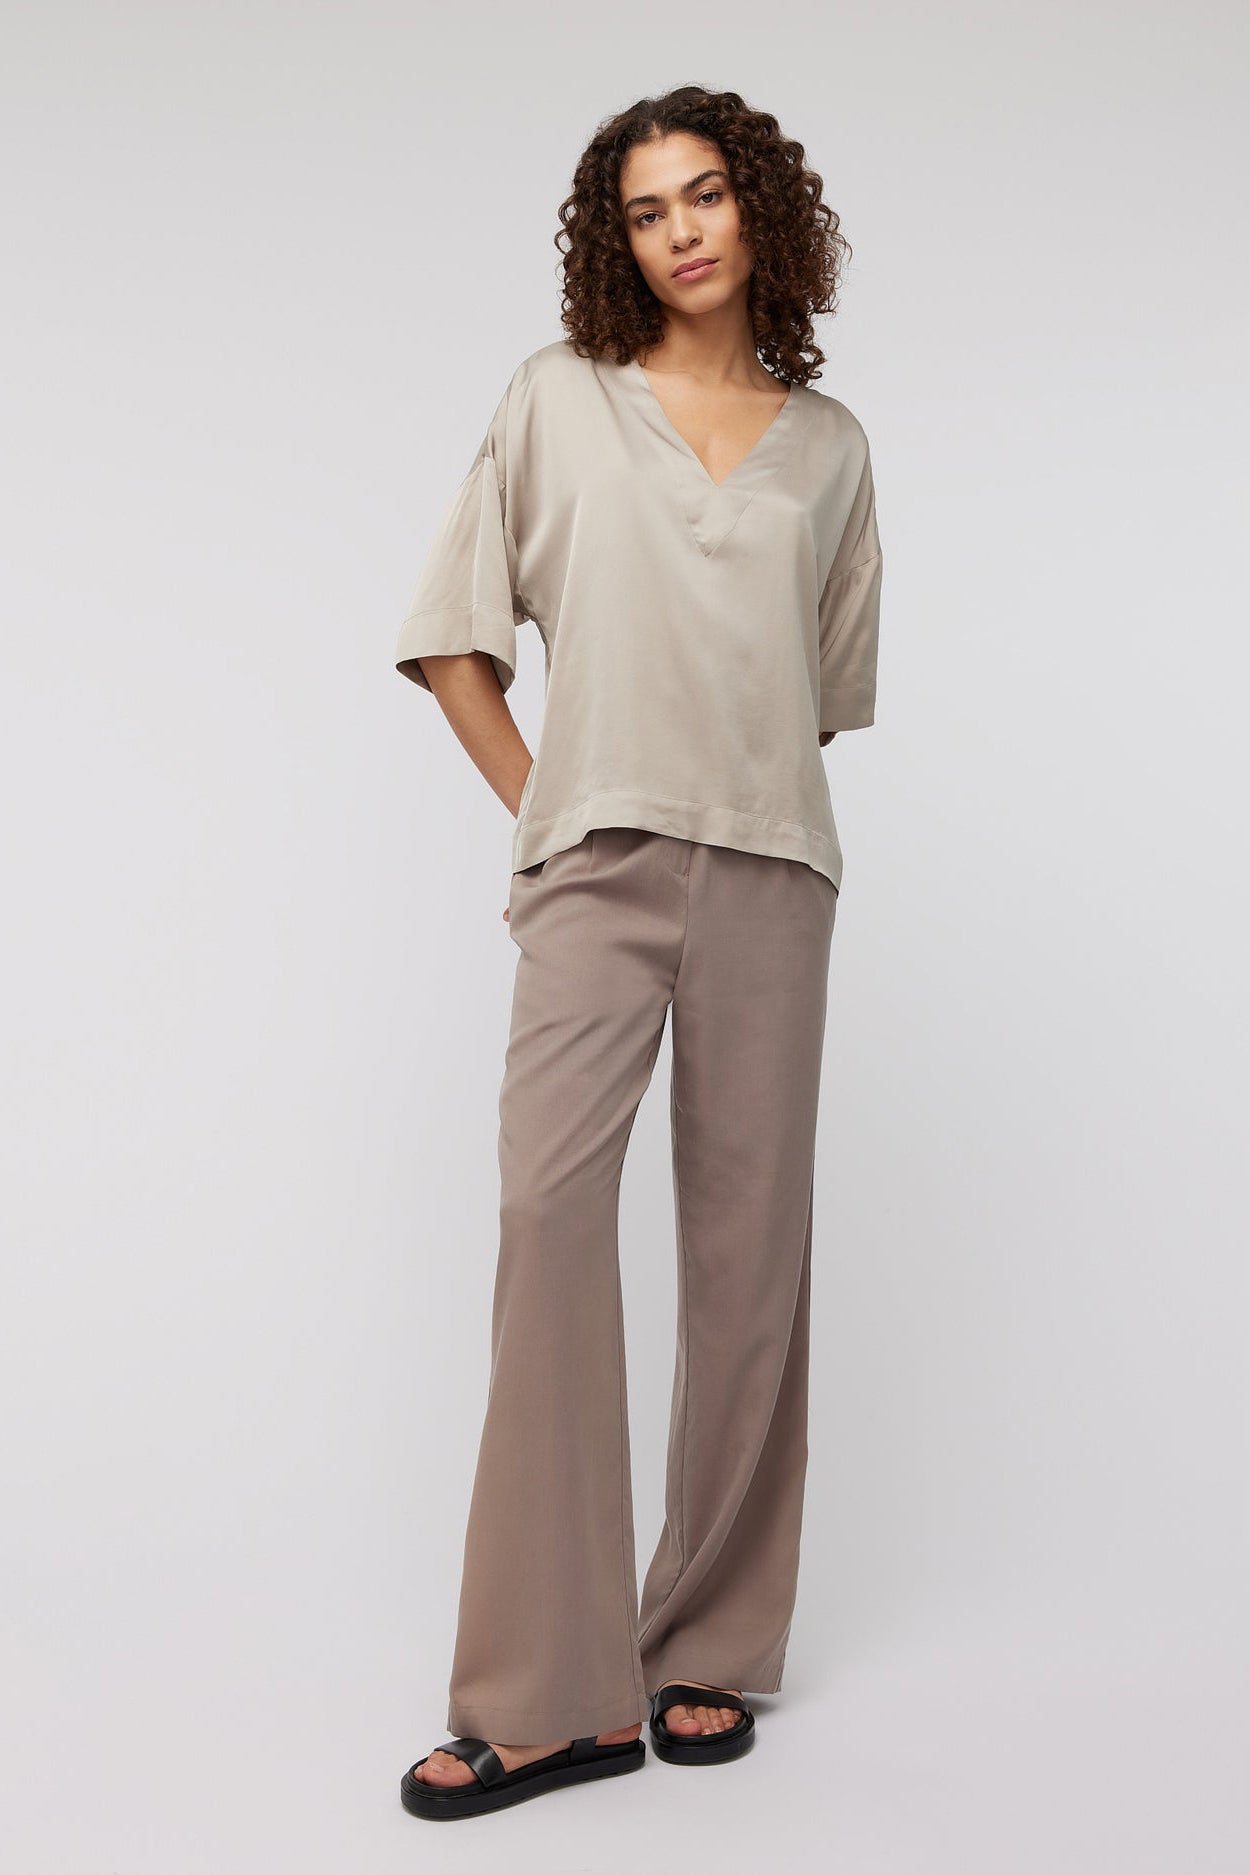 Knit-ted Wendy Pants - Sepia - RUM Amsterdam